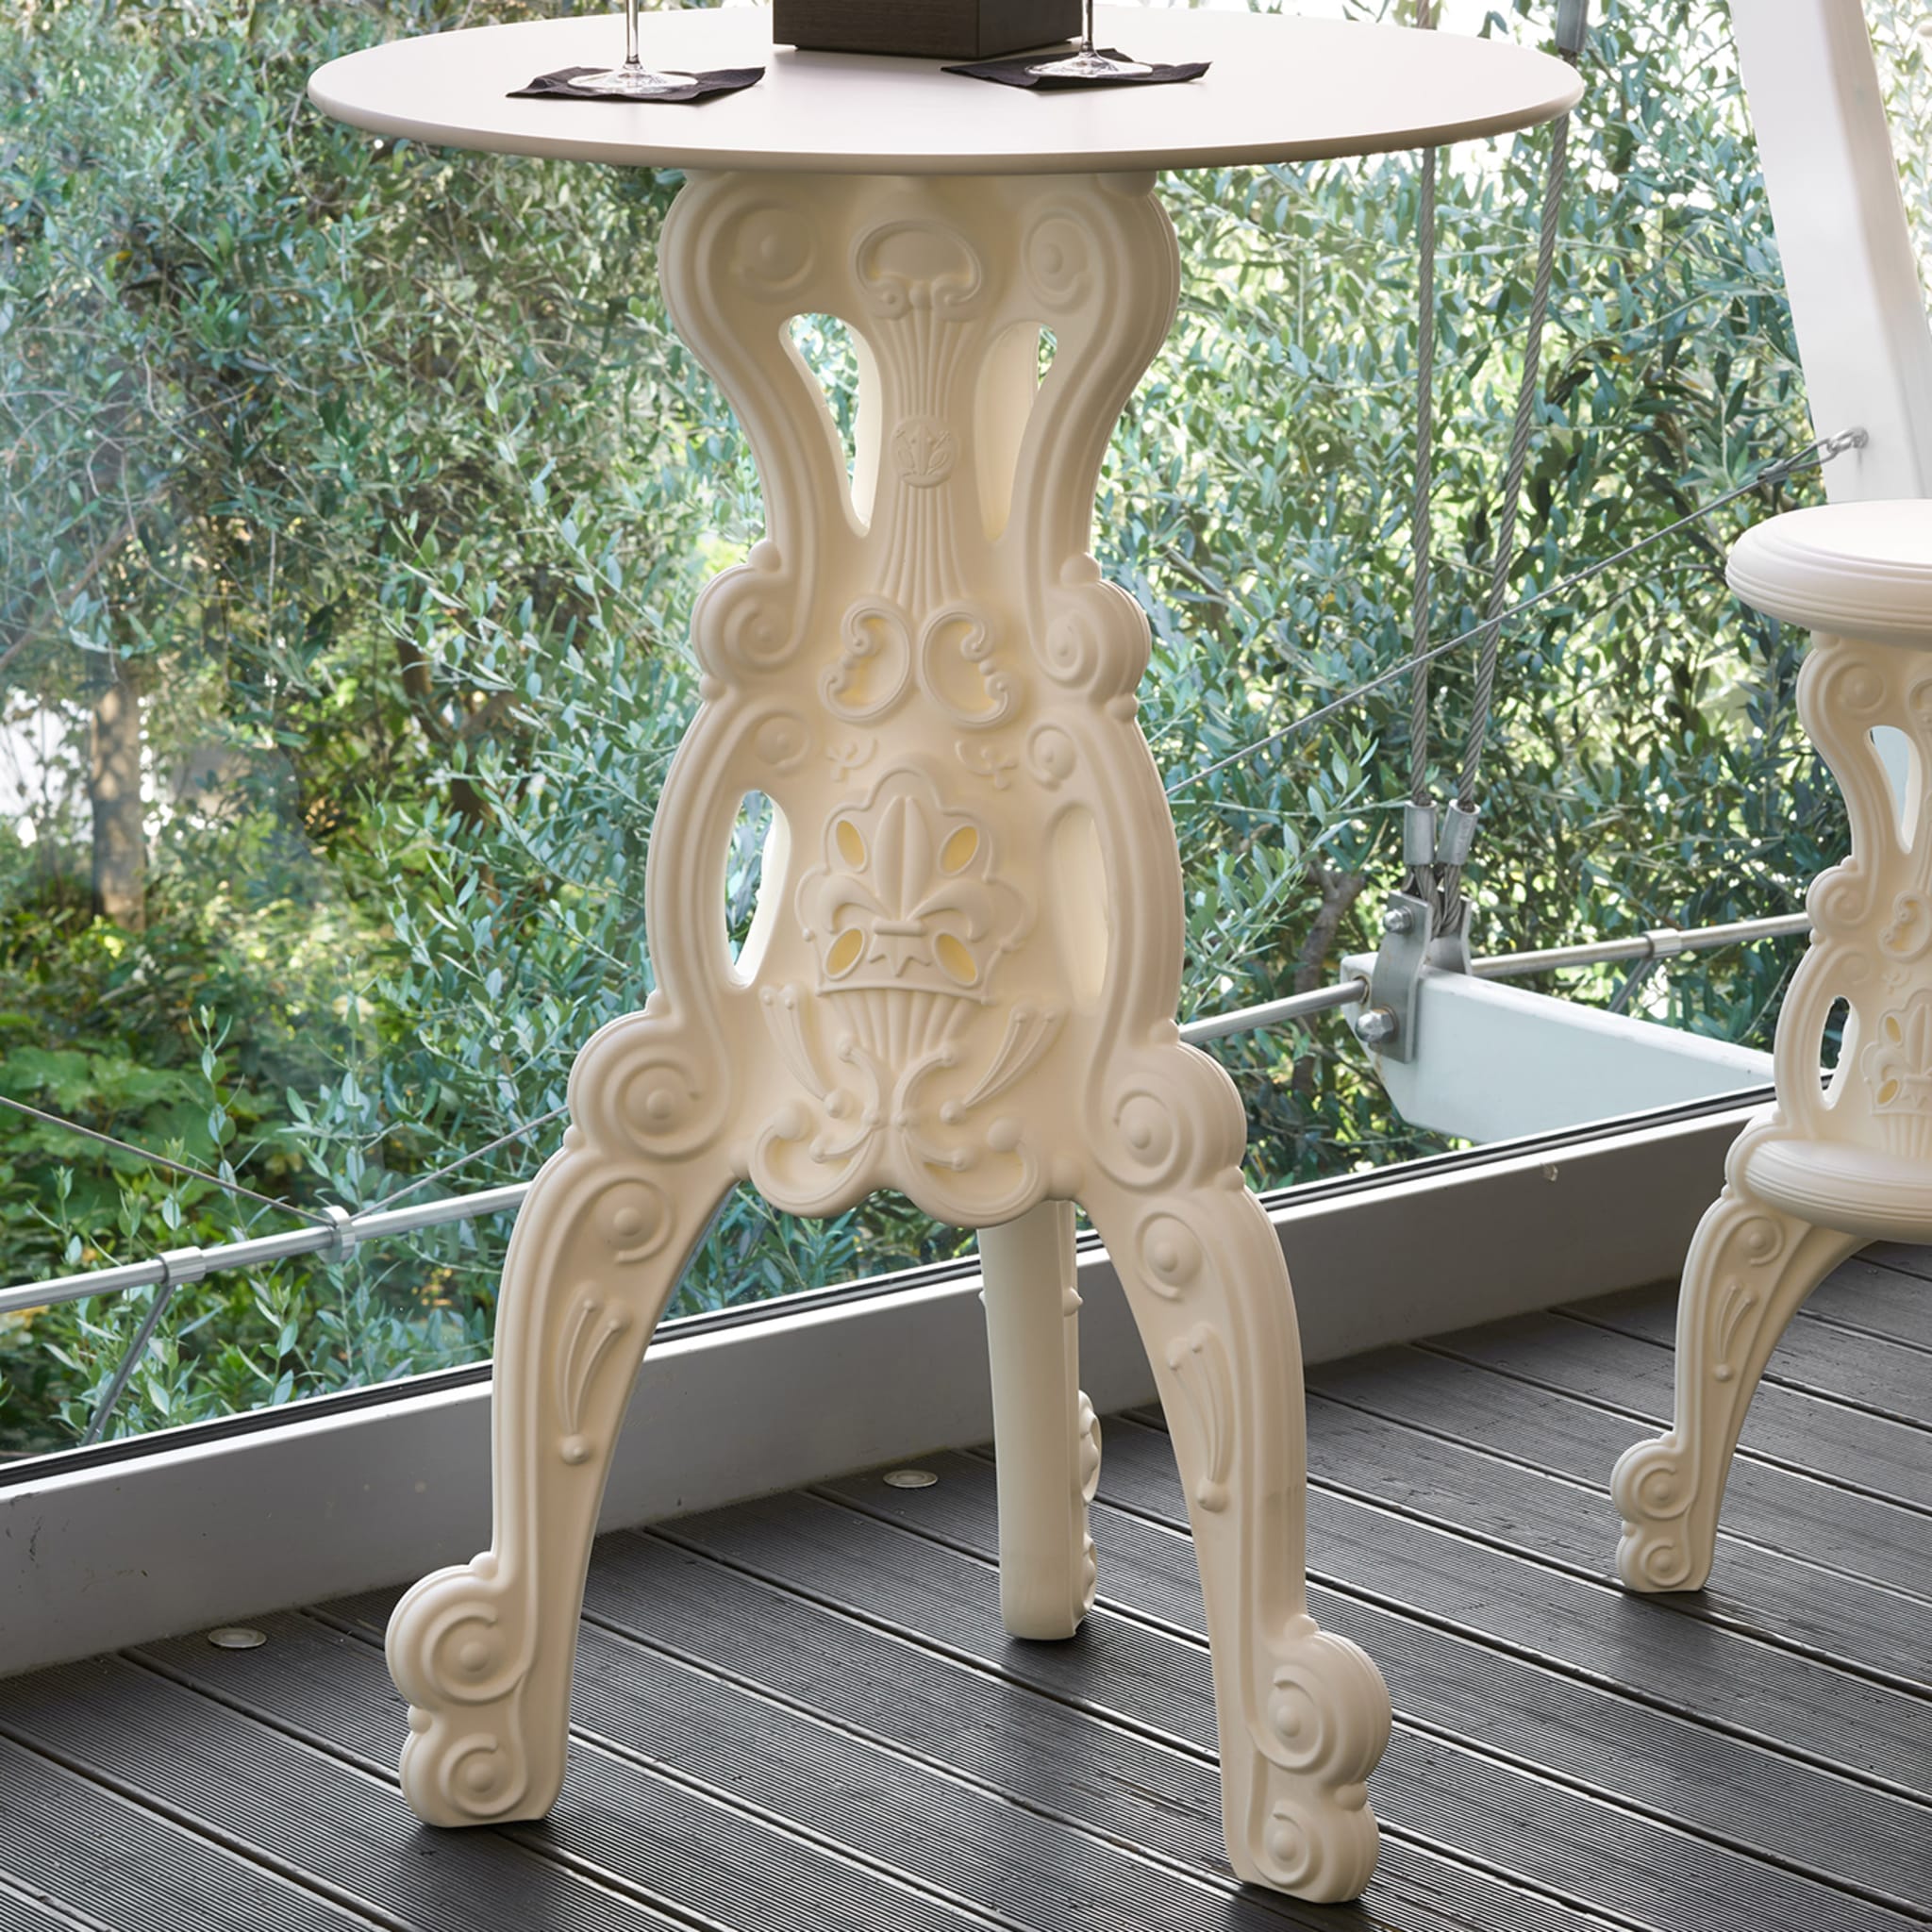 Master of Love White Bistro Table with Round Top - Alternative view 3